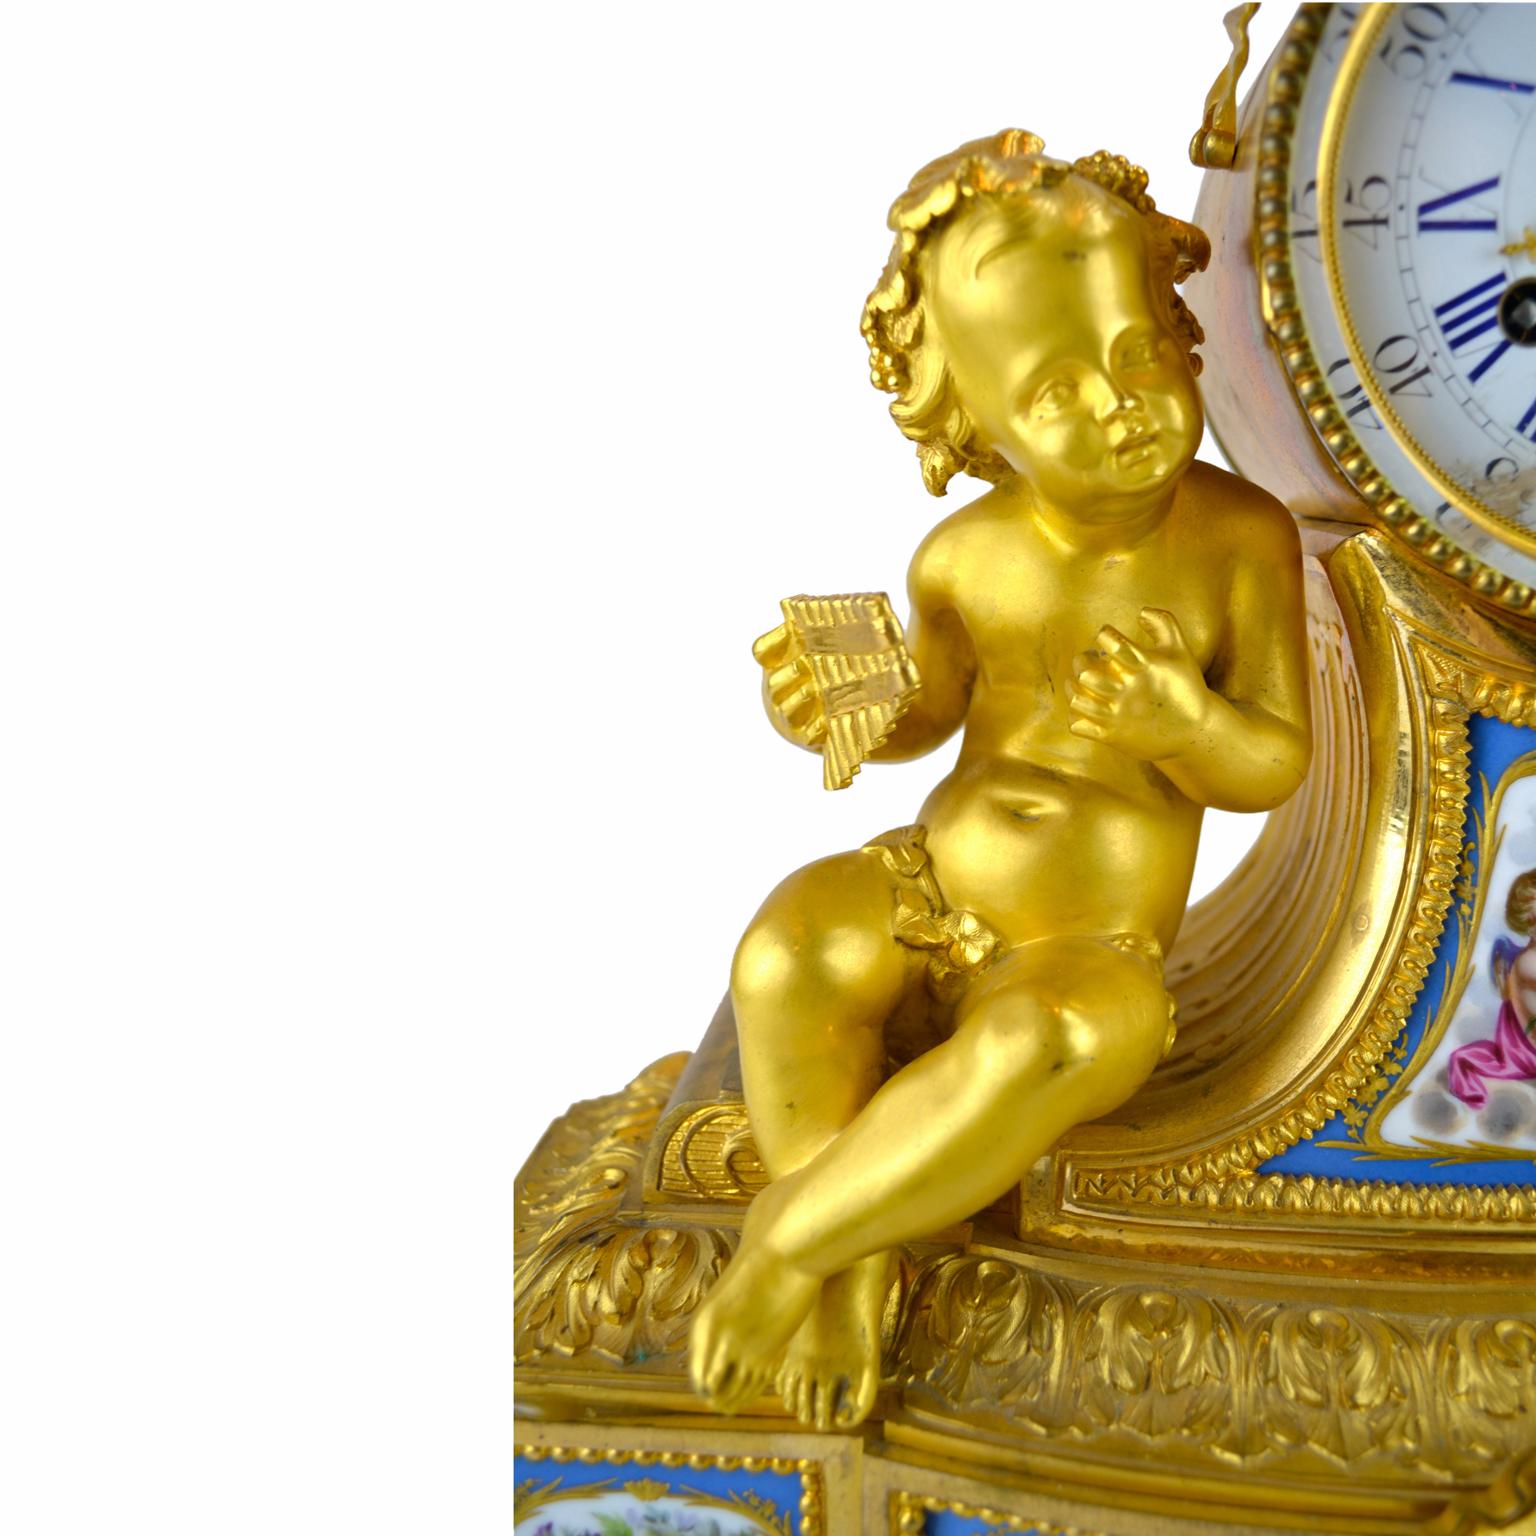  French Napoleon III Gilt Bronze and Porcelain Putti Clock In Good Condition For Sale In Vancouver, British Columbia